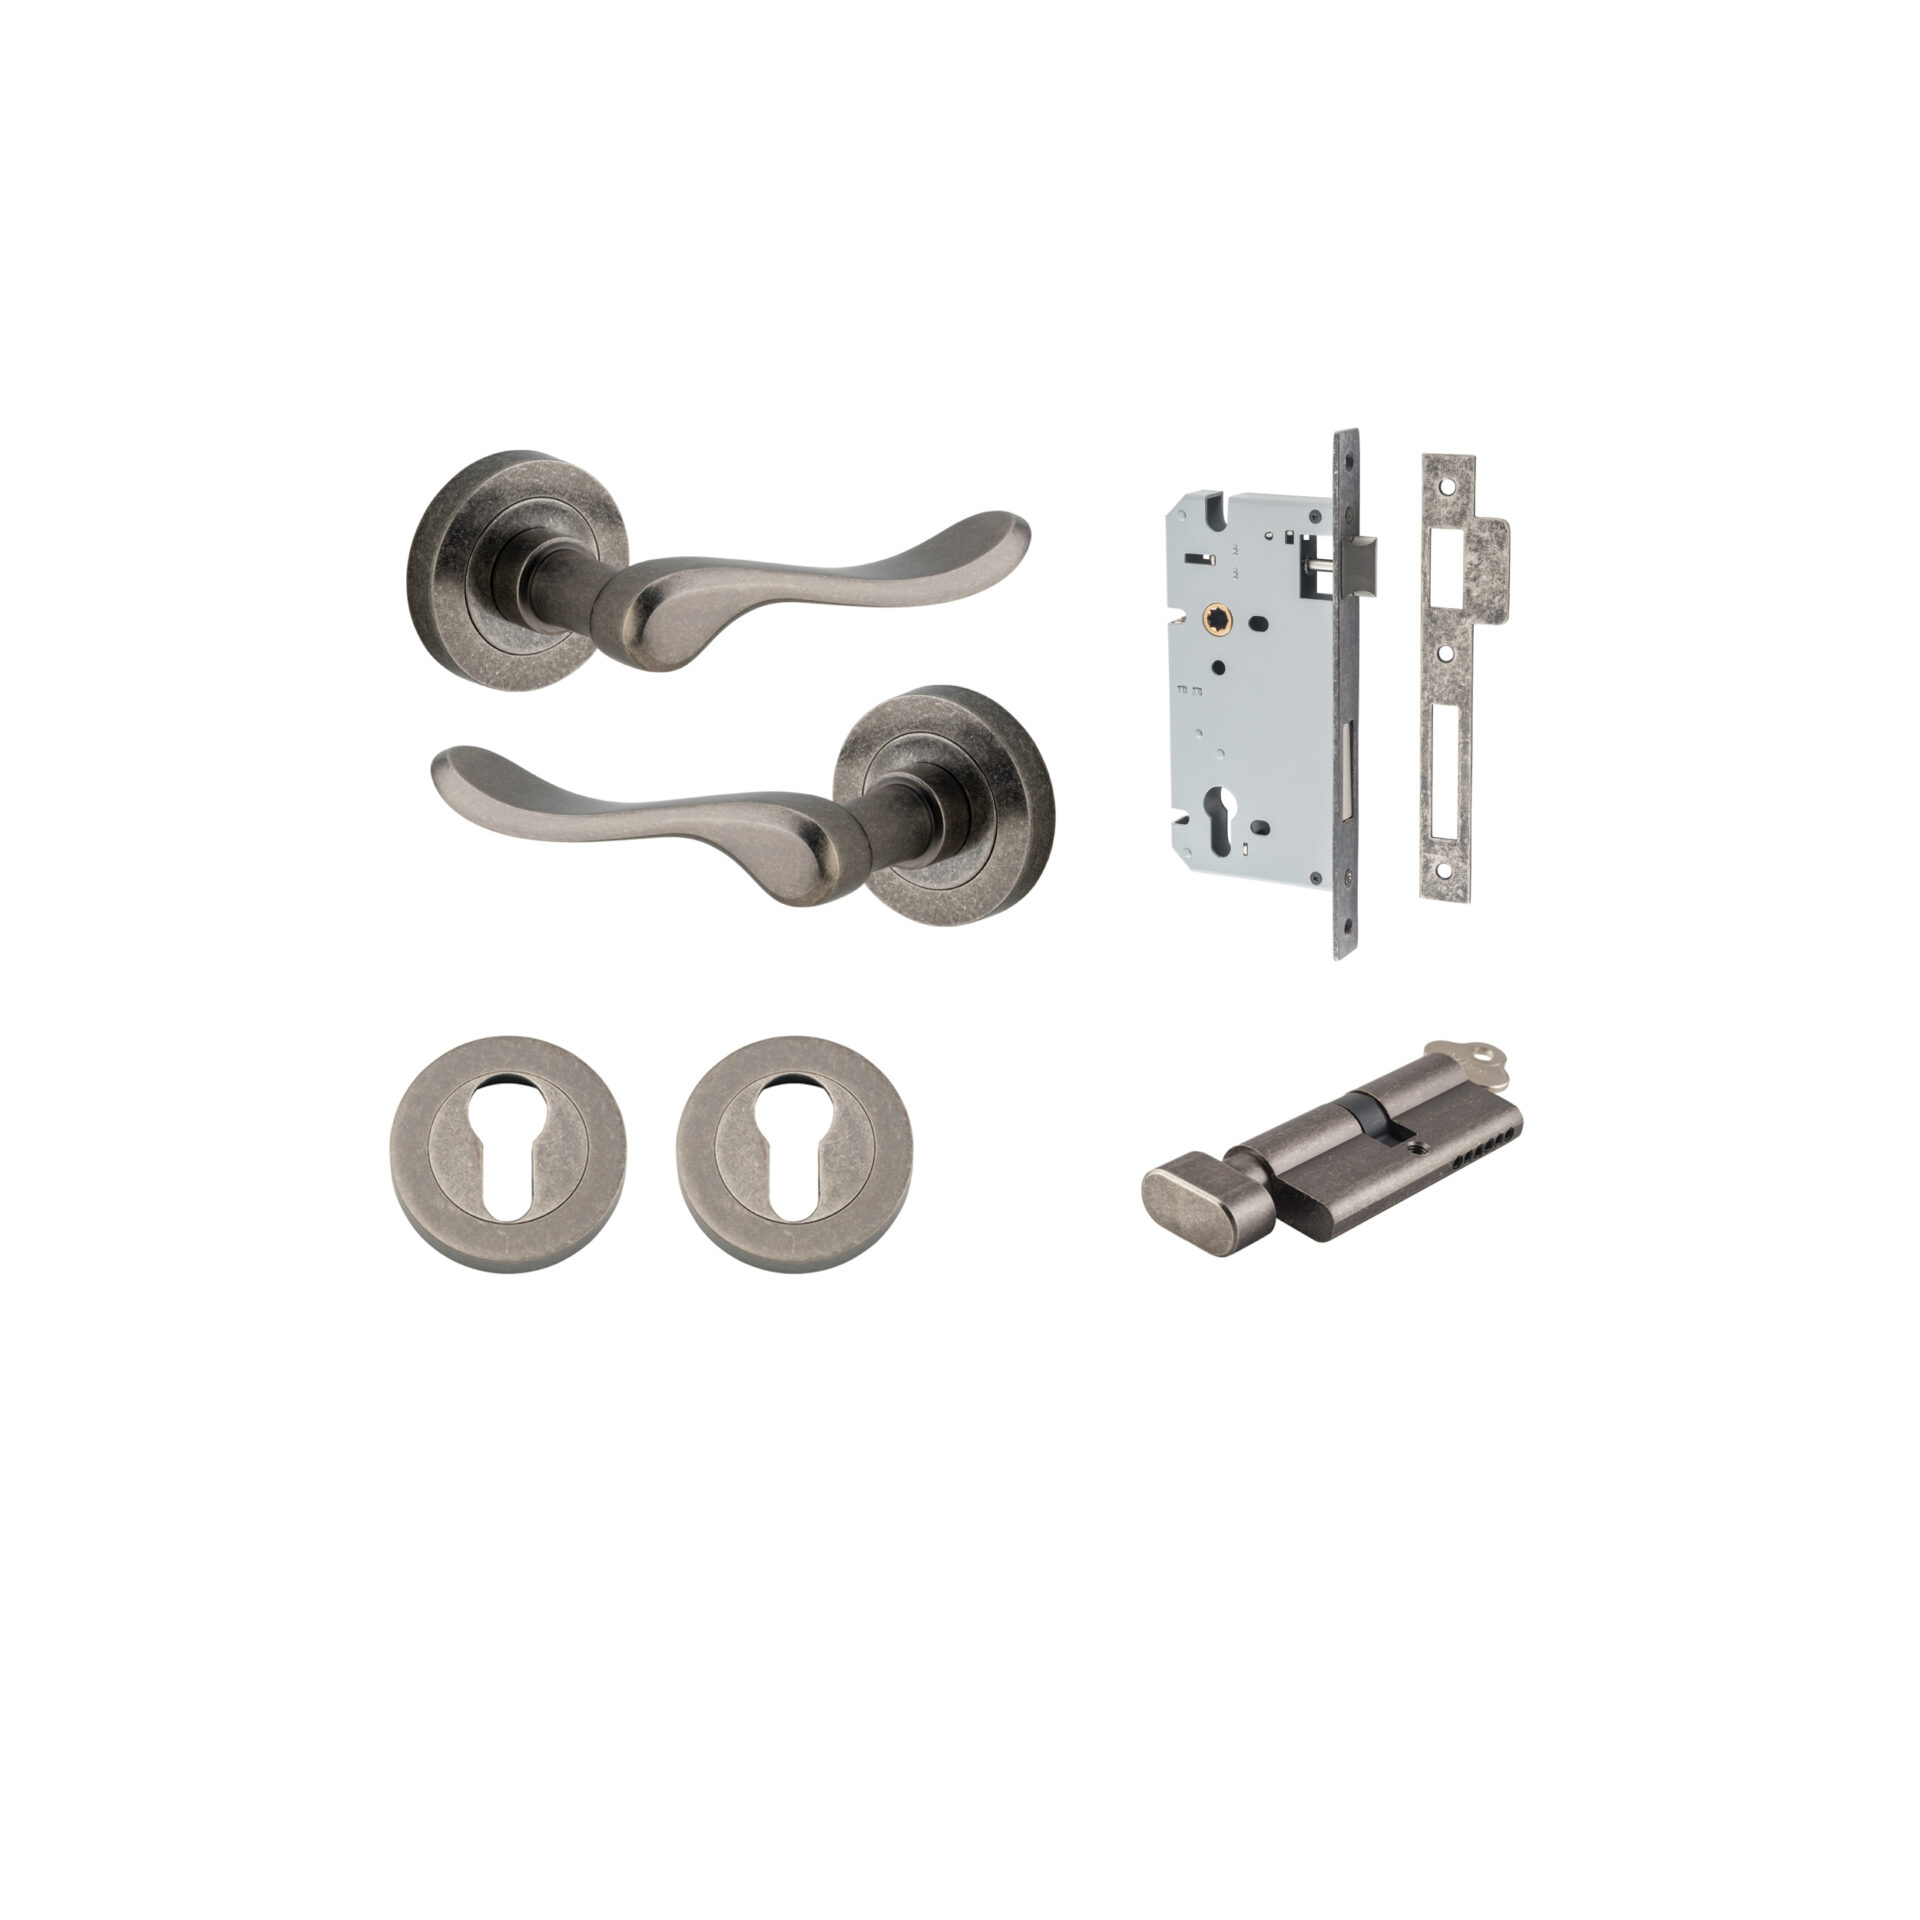 Stirling Lever - Round Rose Entrance Kit with Separate High Security Lock